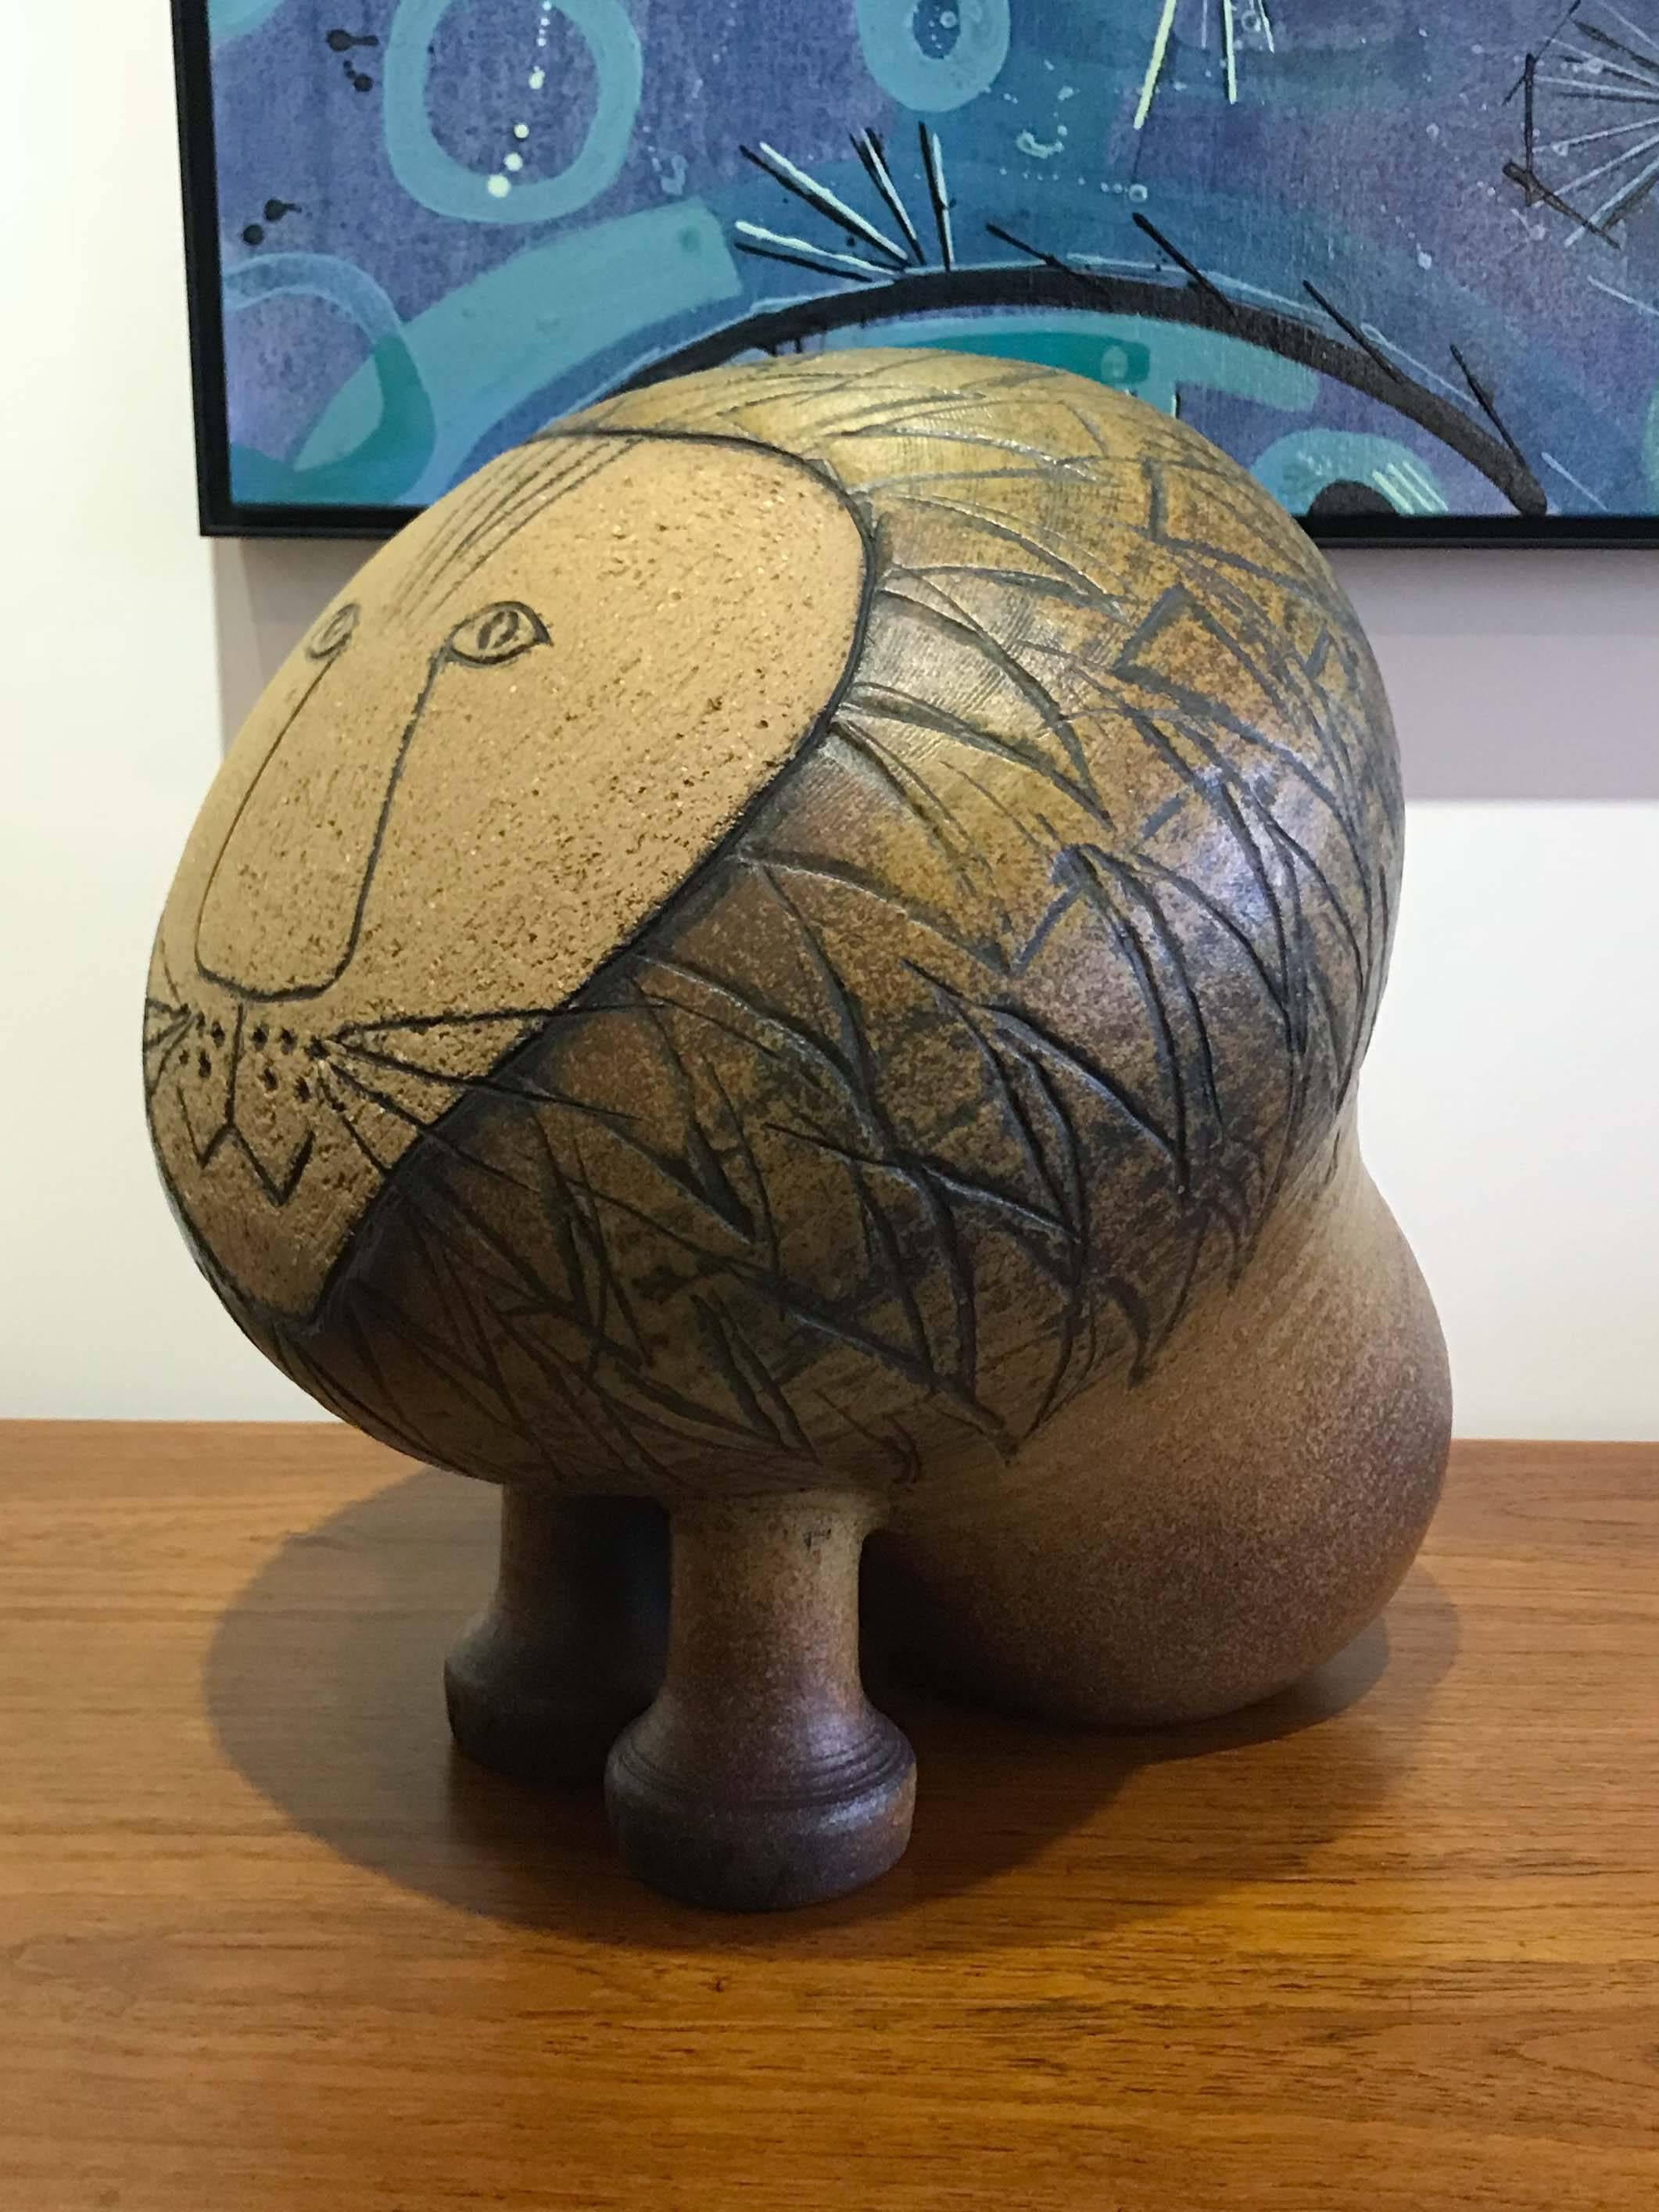 Large lion figure by Lisa Larson for the Africa (Afrika) Series made by Gustavsberg. This size is the largest of the series. Signed and labelled.